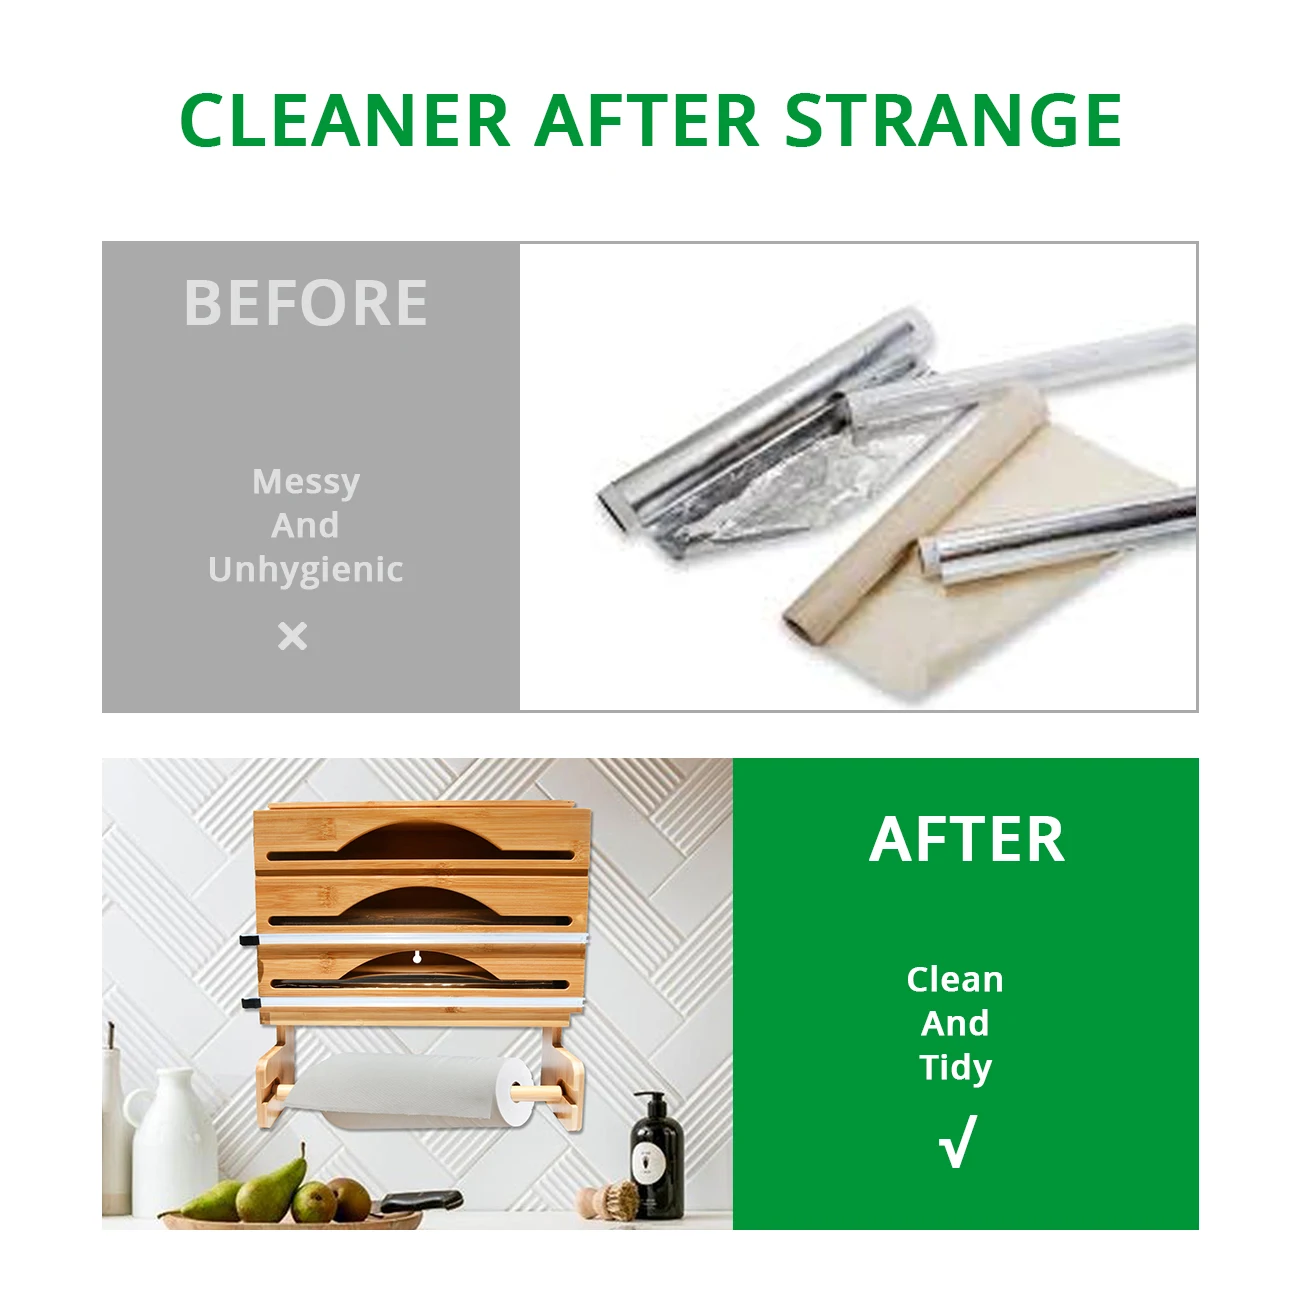 Towel Pan Holder Organizer Plastic Cutter Aluminum Tin Foil and Wax Wrap Paper Kitchen Accessories Kitchen Bamboo 4 in 1 500pcs